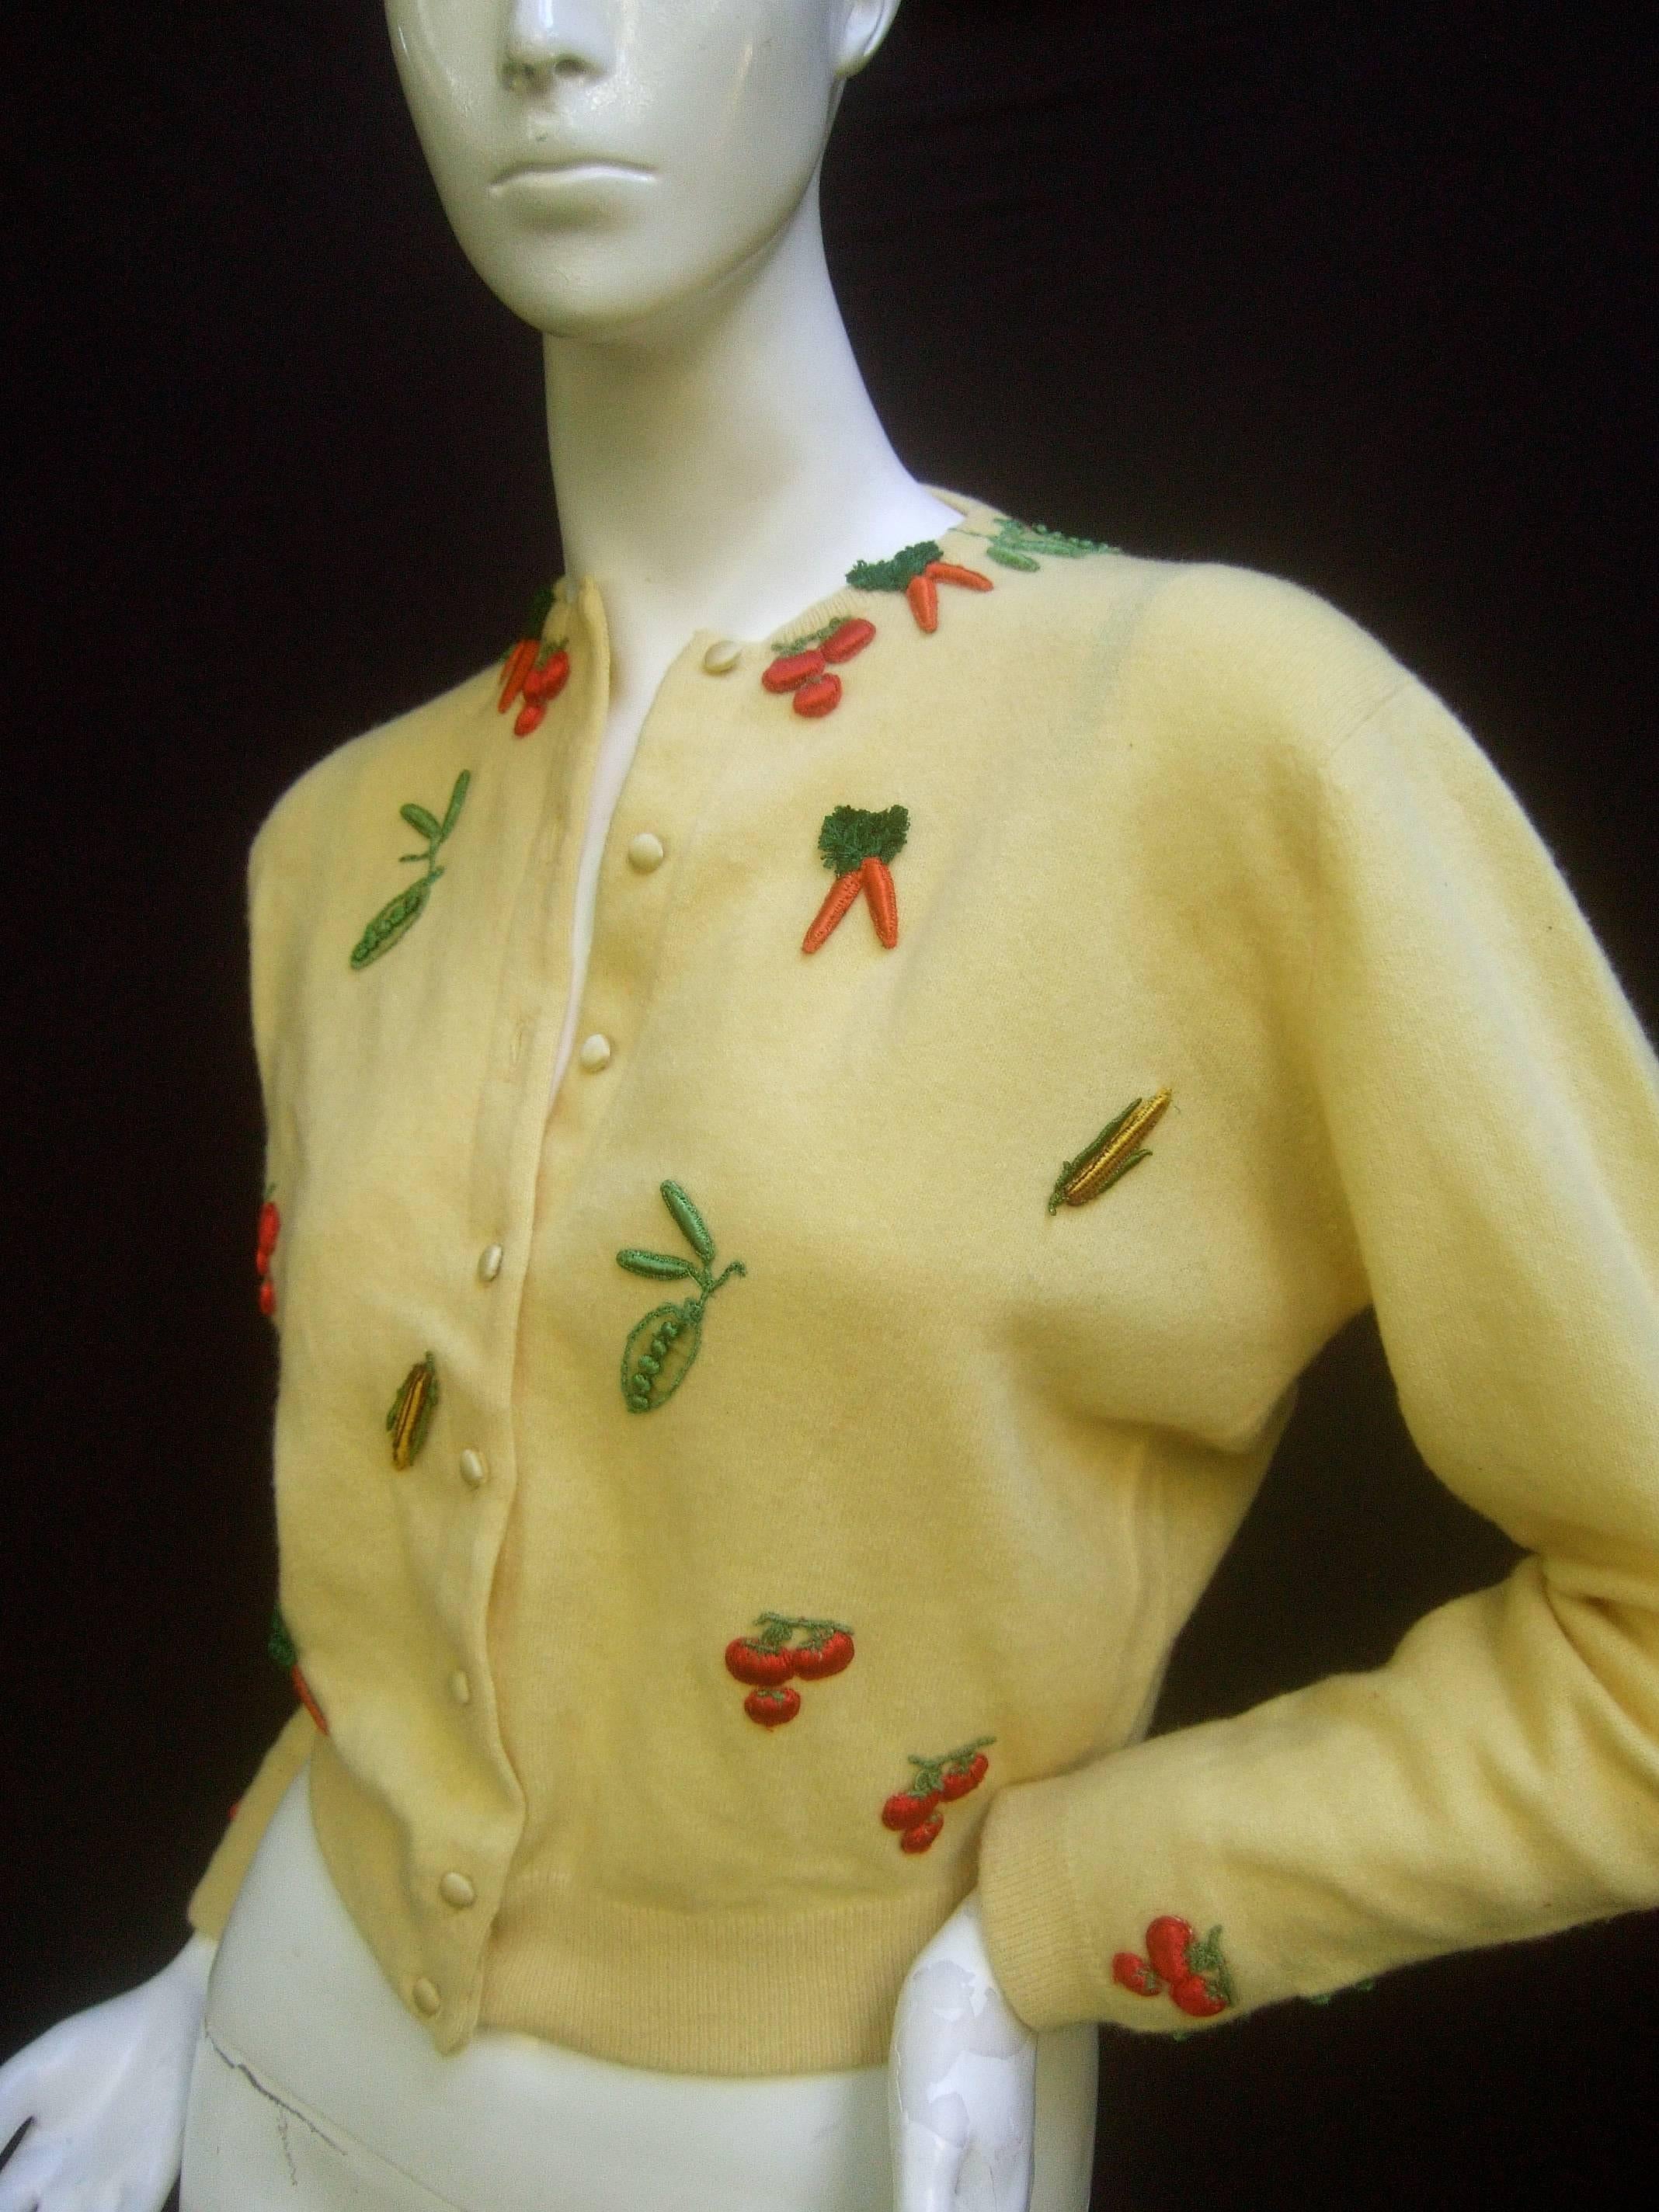 Whimsical buttercup yellow cashmere vegetable theme cardigan c 1960s
The unique cashmere cardigan is designed with a collection 
of appliqué vegetables

The vegetable garden of carrots, tomatoes, peas and corn stalks  
are scattered throughout the